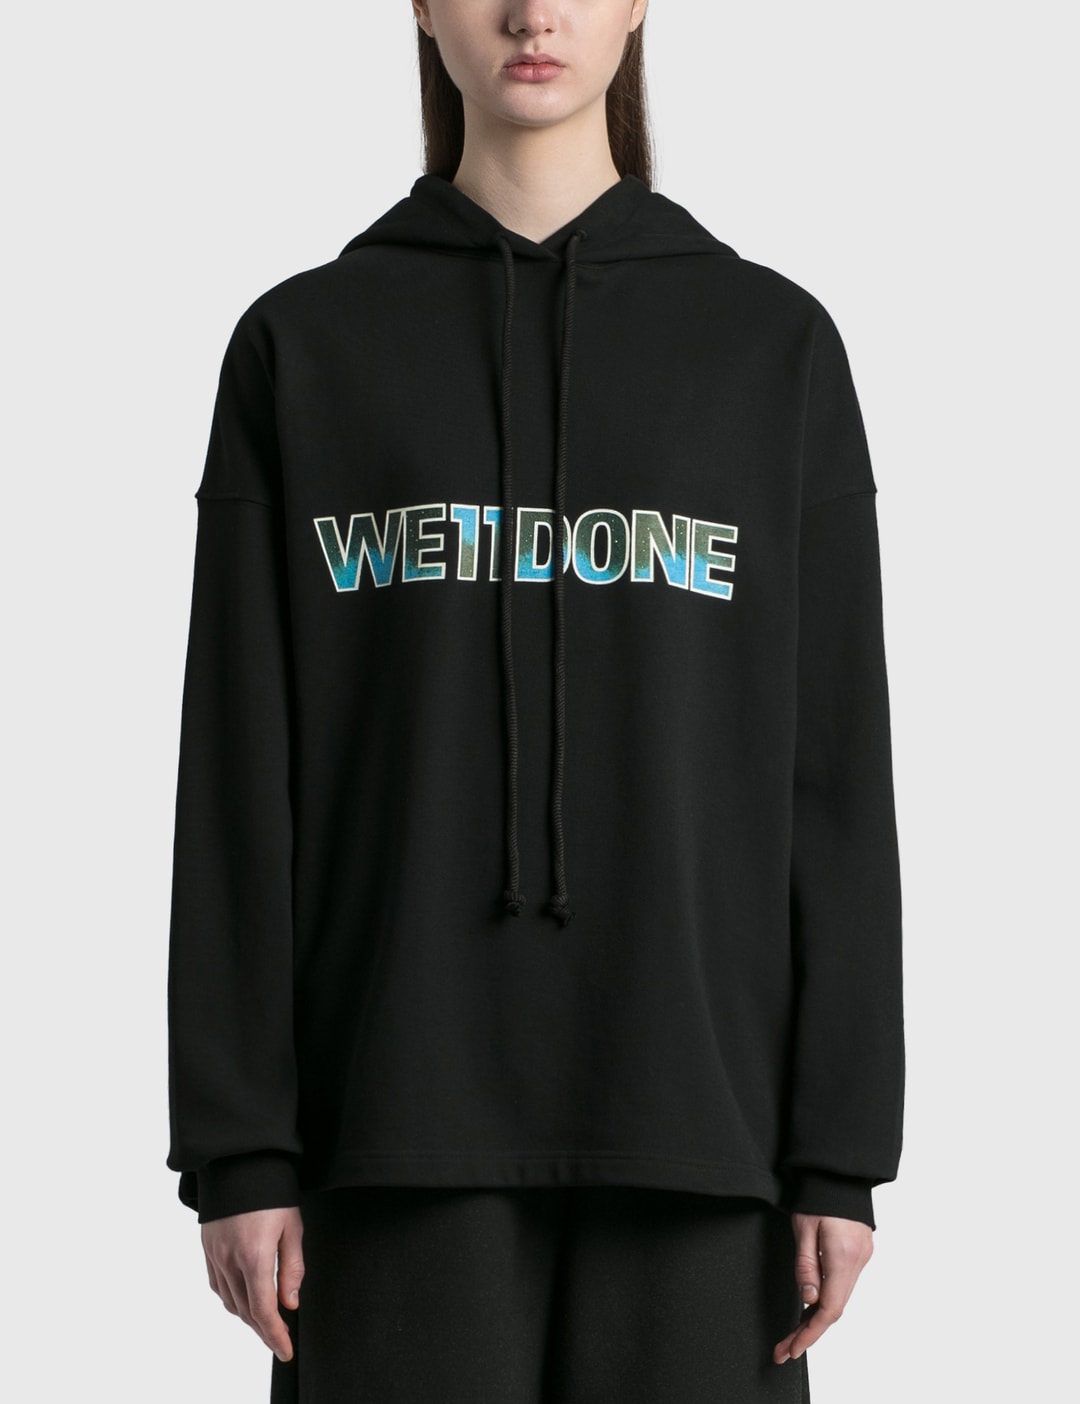 We11done - New Logo Hoodie | HBX - Globally Curated Fashion and ...